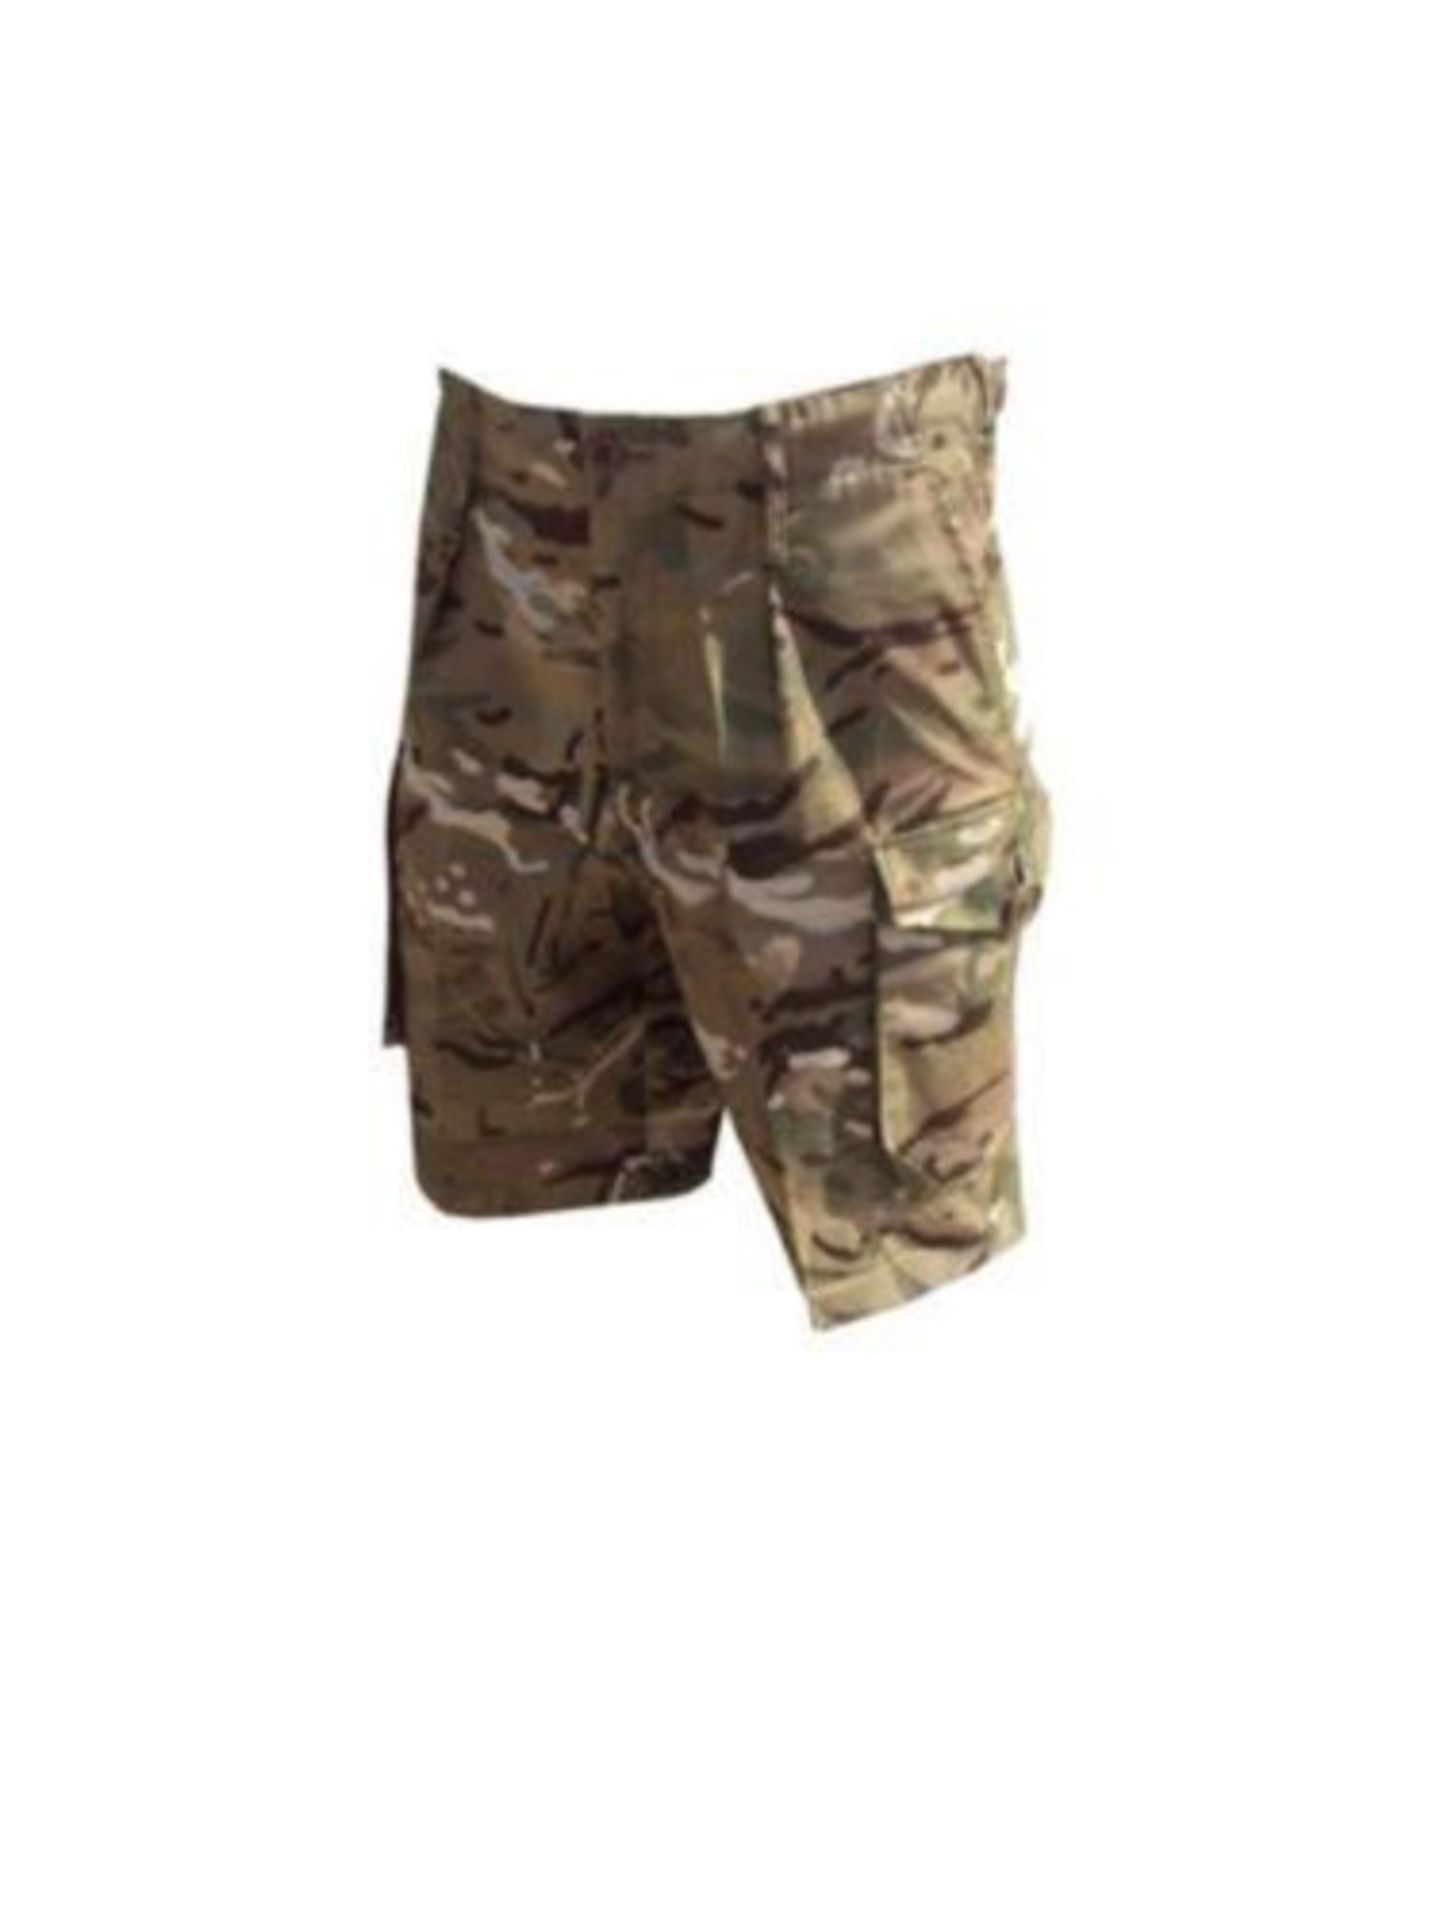 PACK OF 40 - MTP SHORTS - MIX OF SIZES - BRAND NEW